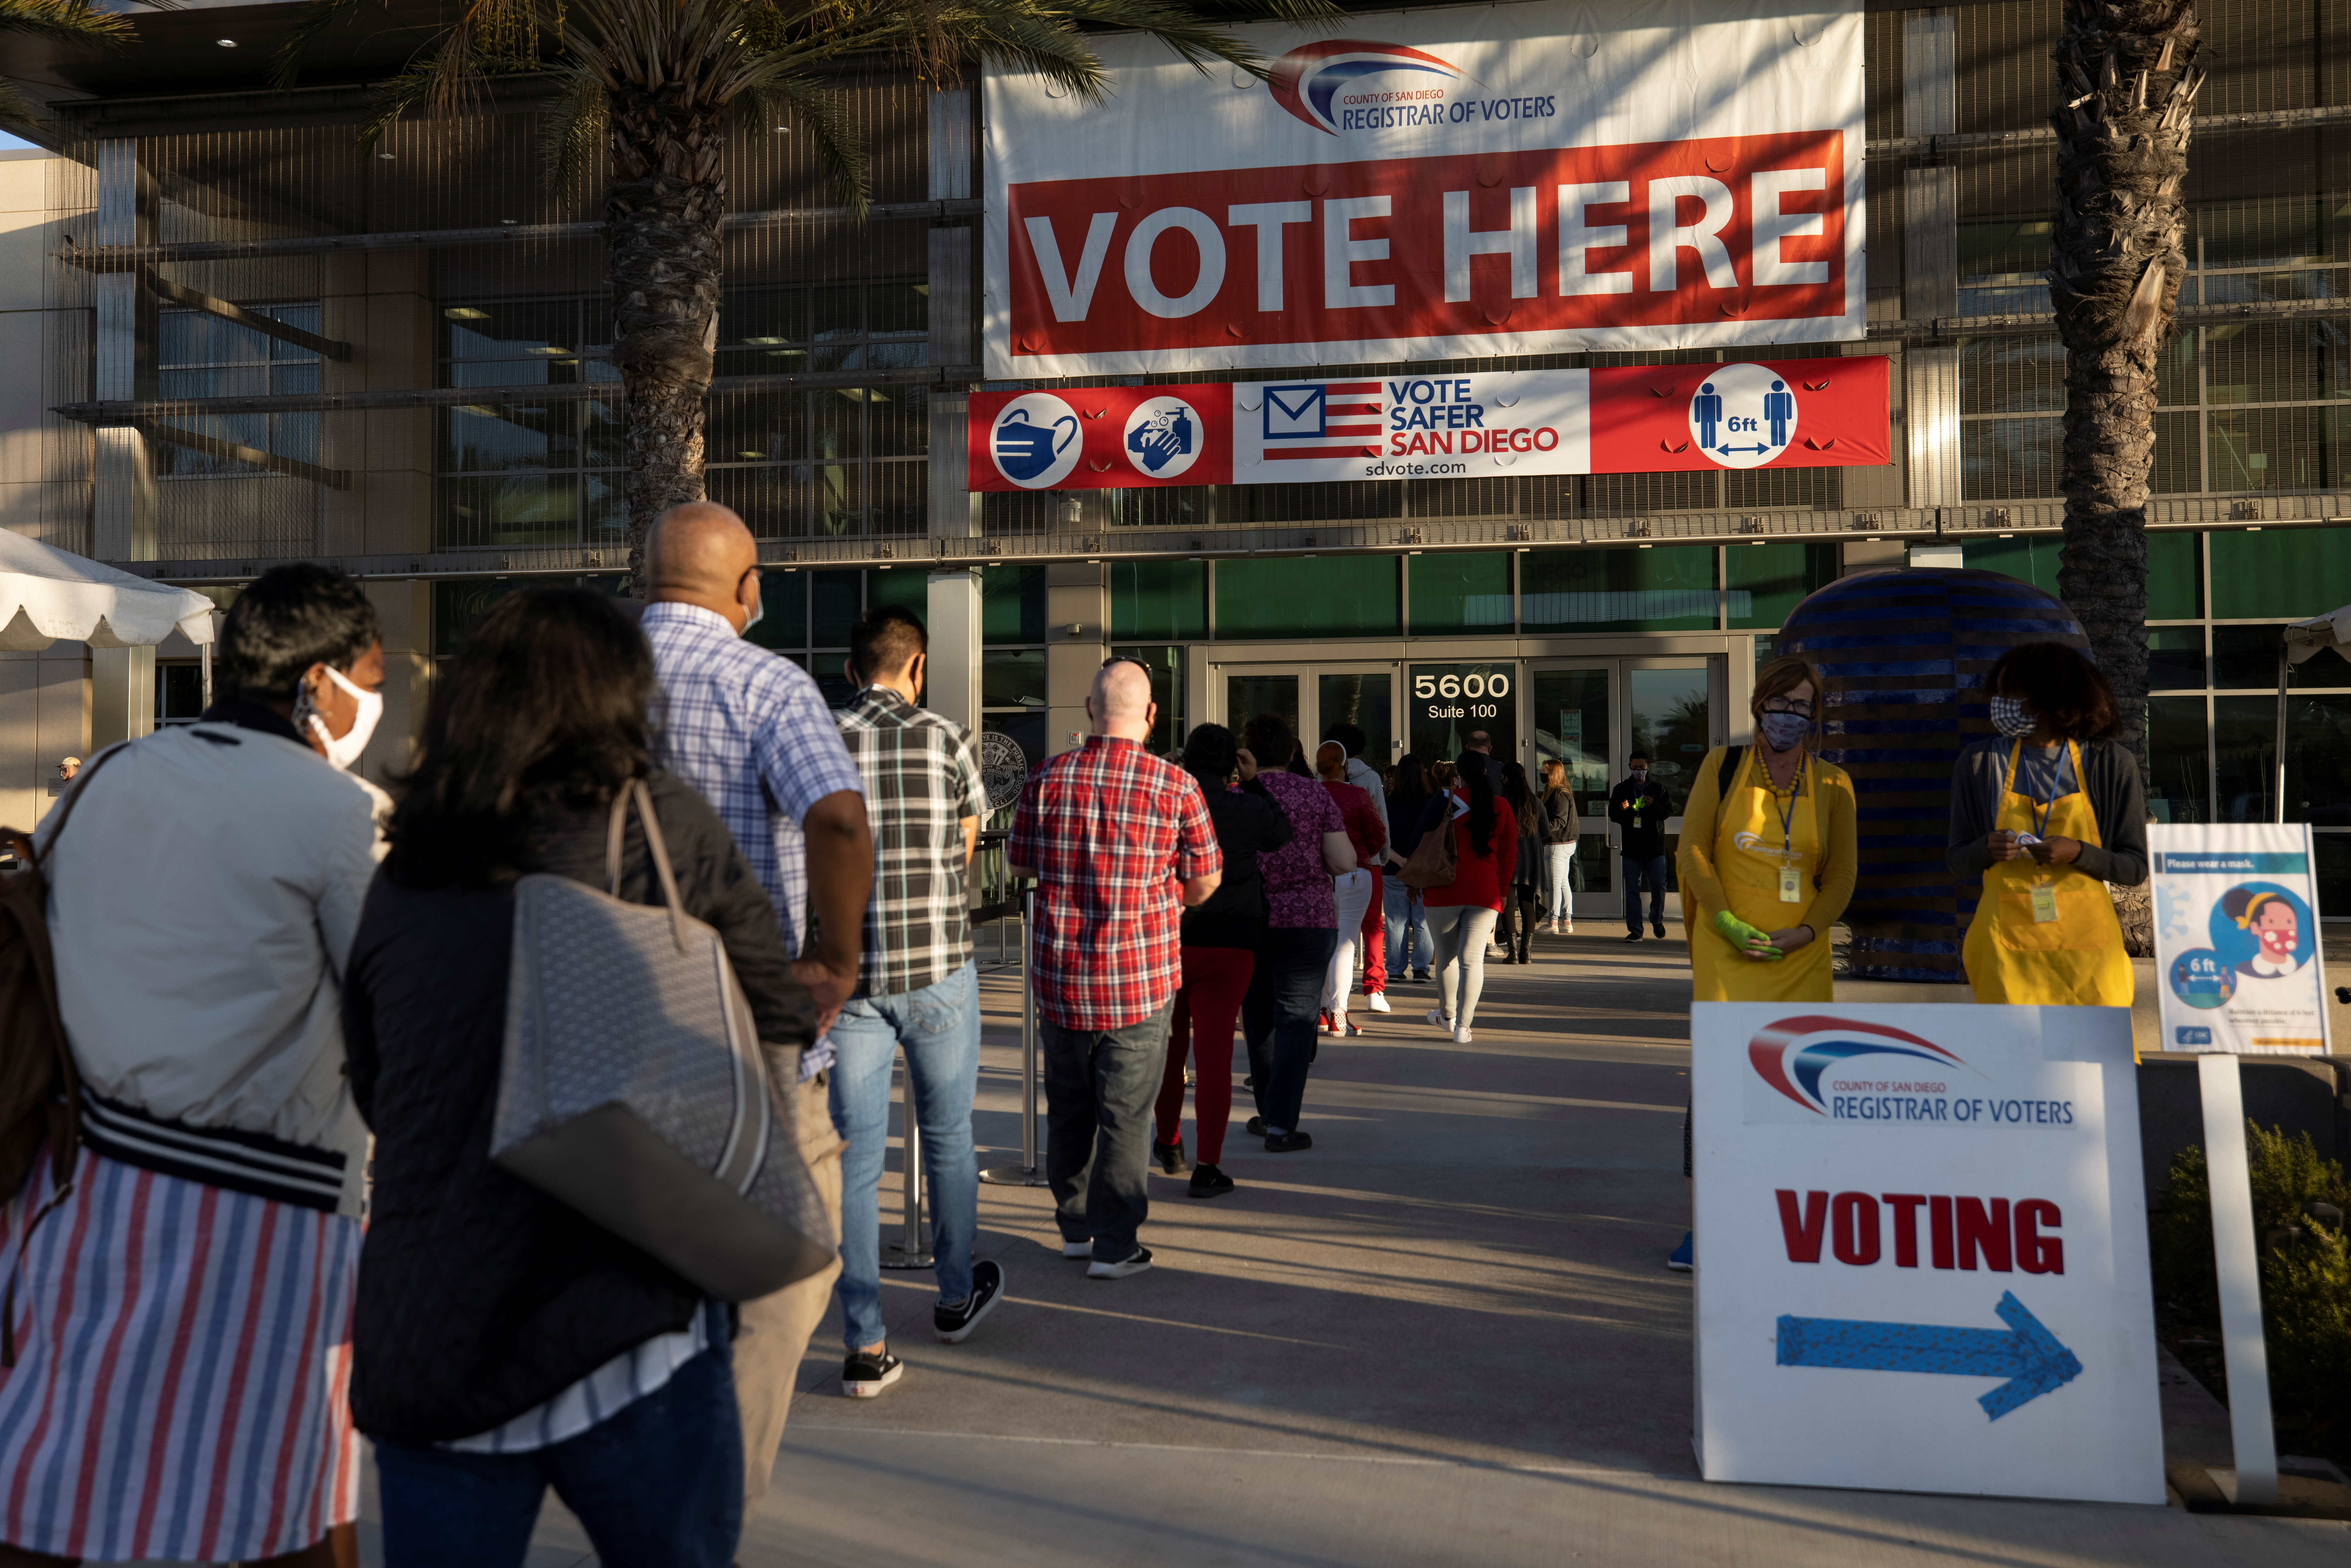 Poll workers wait in line to grab breakfast prior to the polls opening at the Registrar of Voters on the day of the U.S. Presidential election in San Diego, California